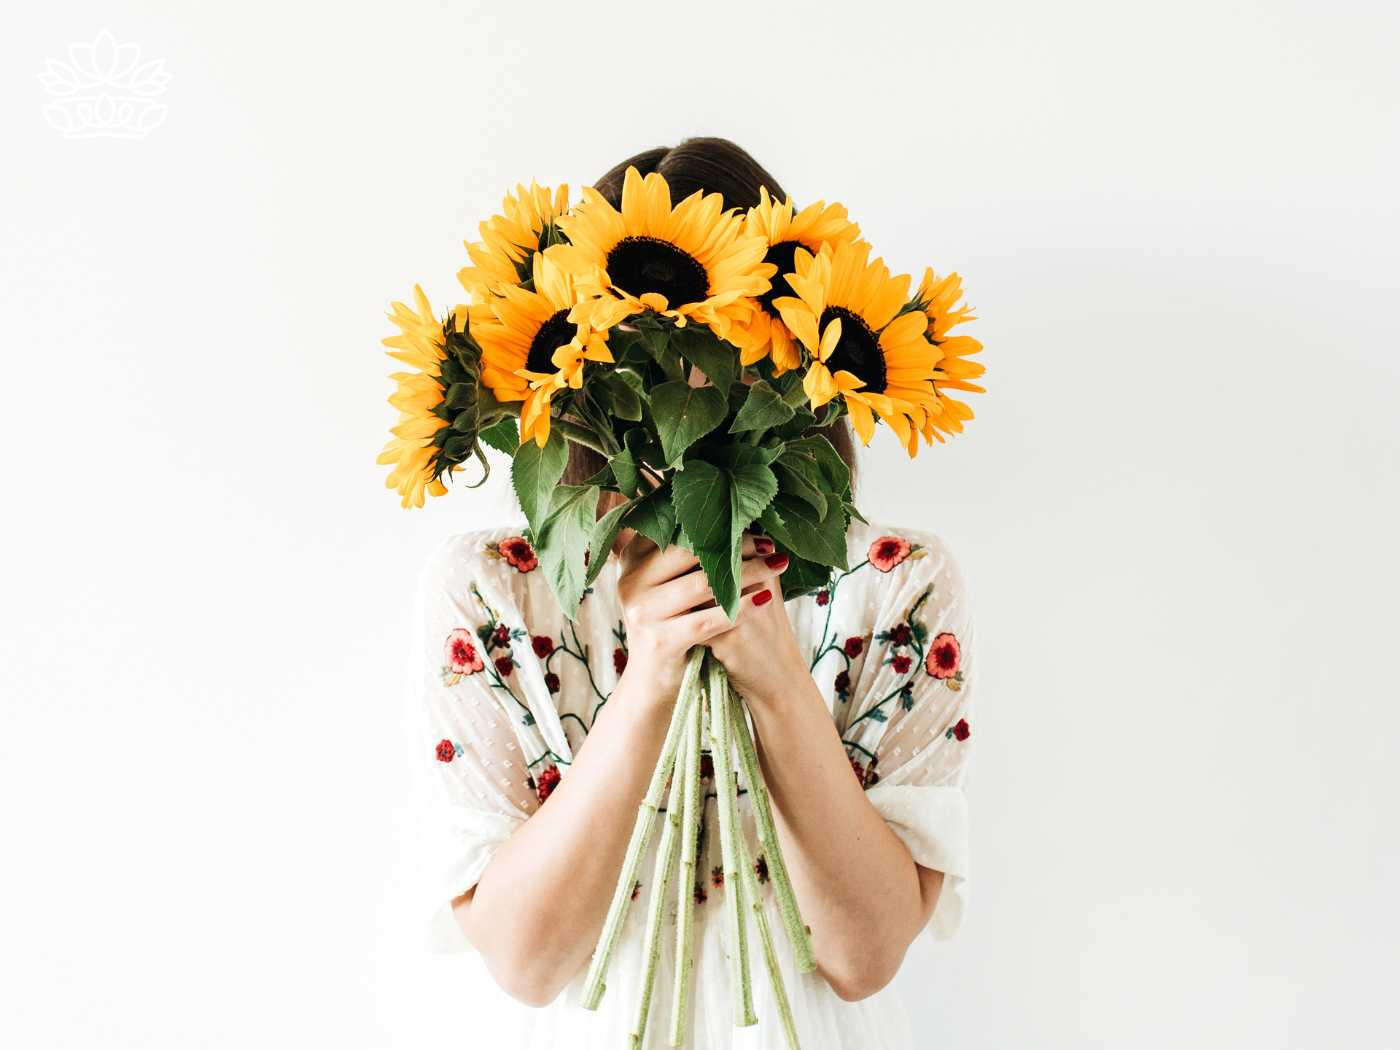 A woman holding a large bouquet of vivid yellow sunflowers in front of her face, wearing a white floral dress, from the Sunflowers Collection by Fabulous Flowers and Gifts.